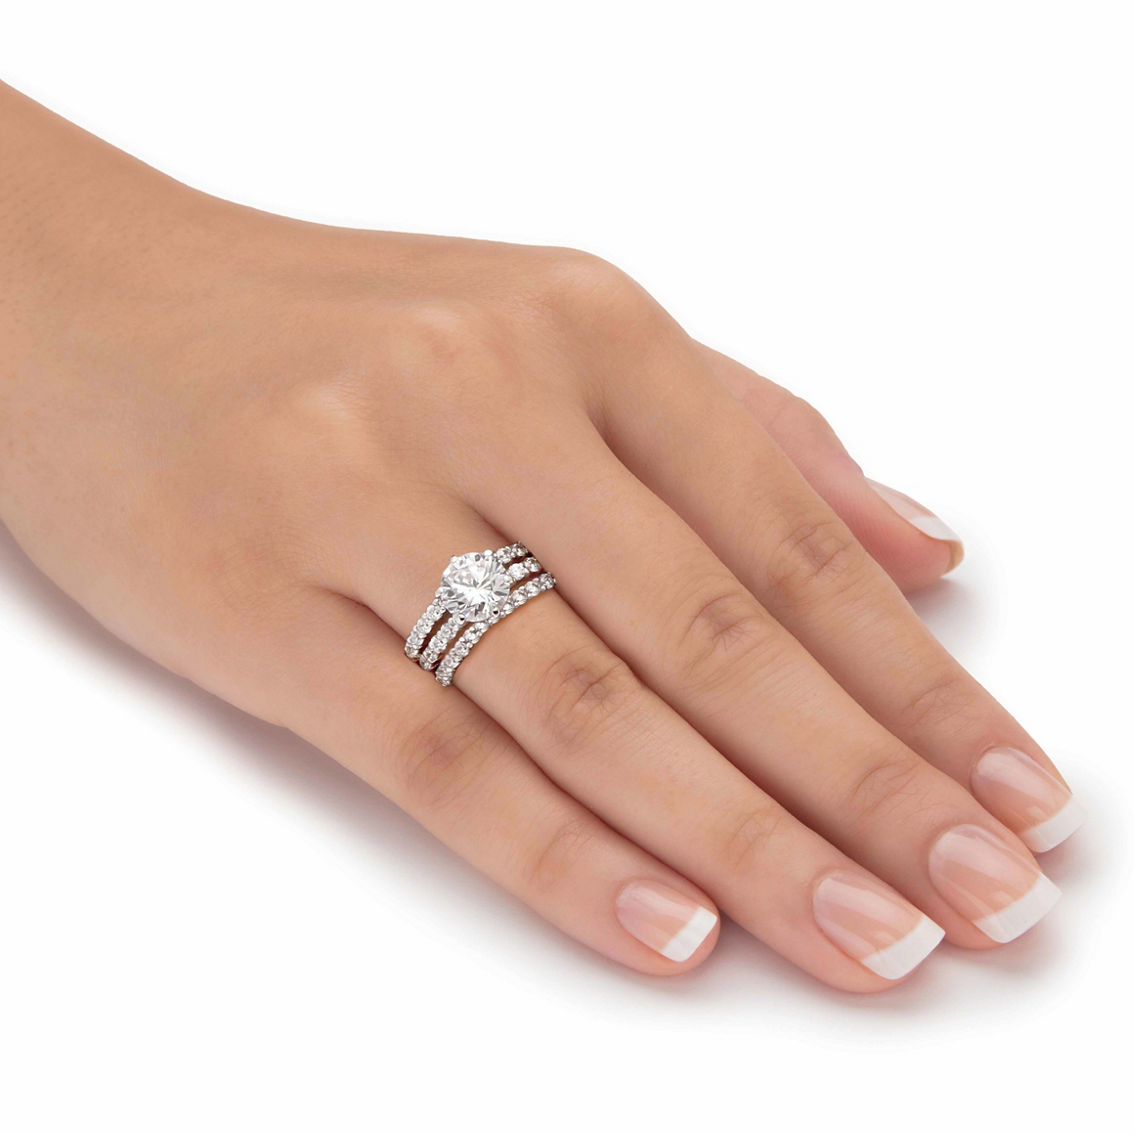 PalmBeach 3 Piece 3.75 TCW CZ Bridal Ring Set in Platinum-plated Sterling Silver - Image 3 of 5